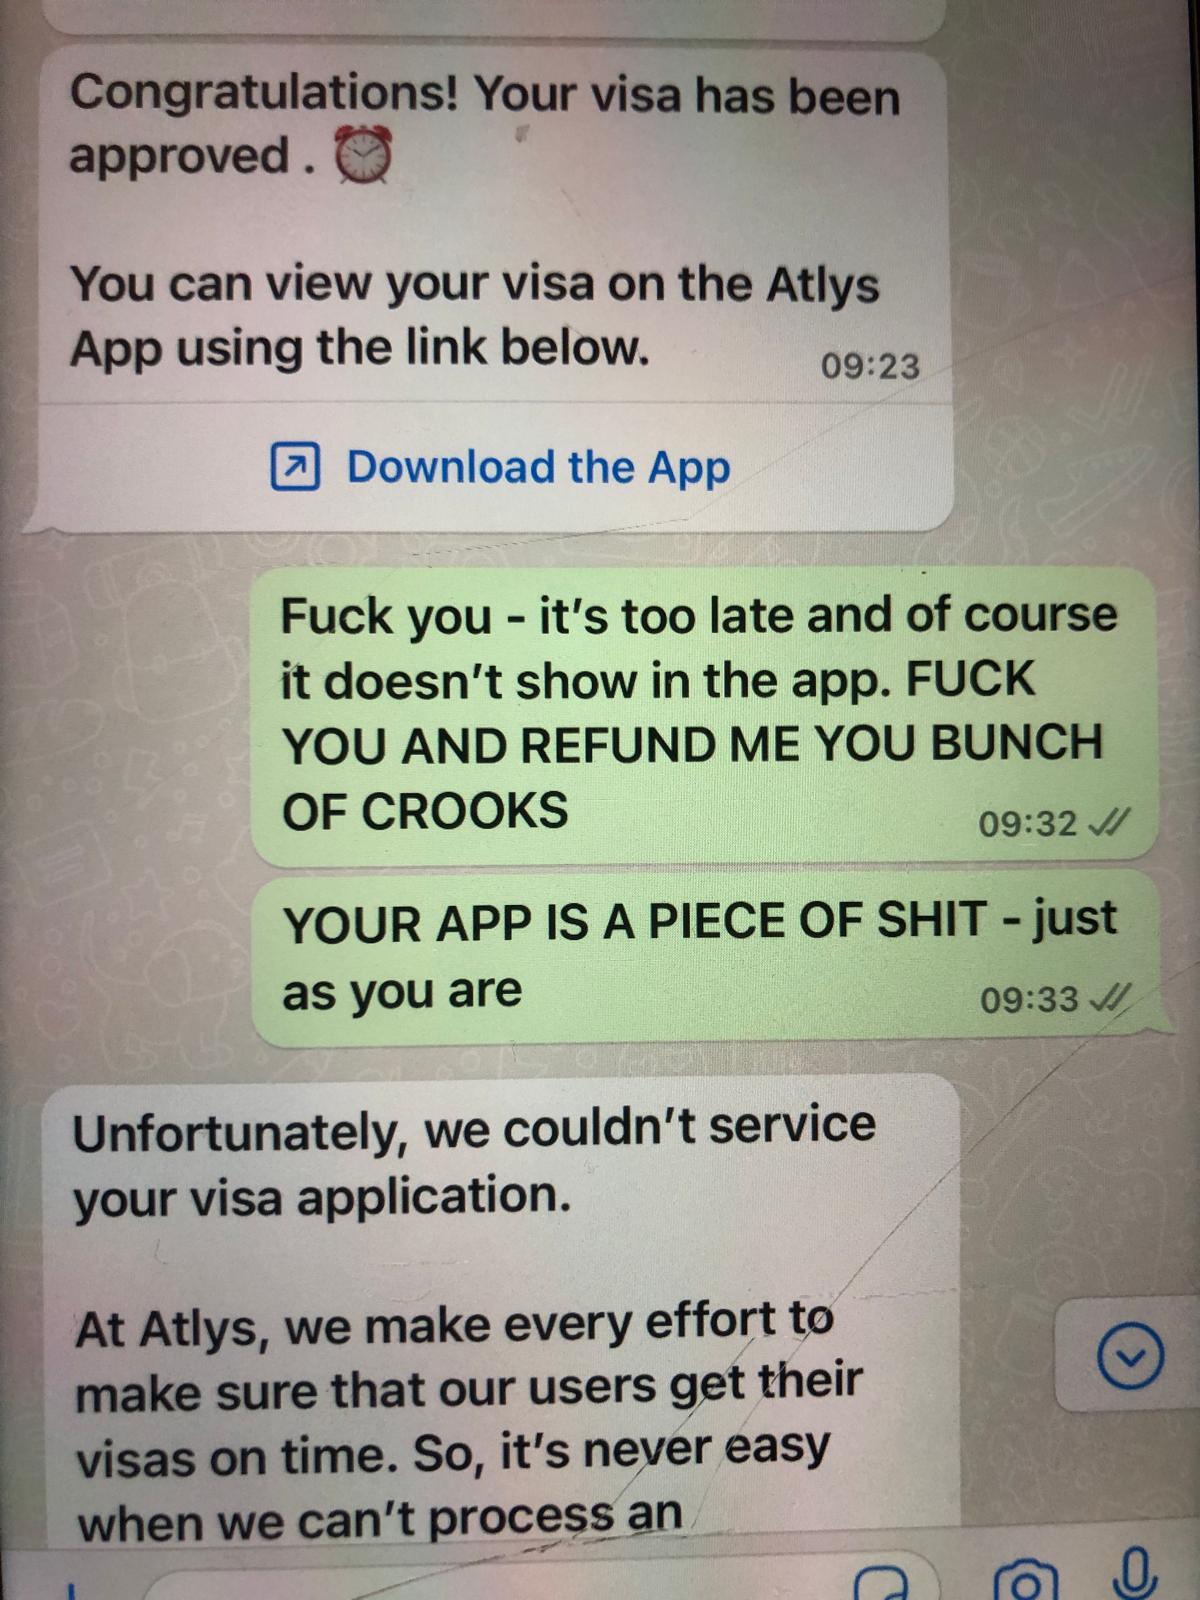 Atlys Takes Your Money, Lies to You Repeatedly, App Doesn't Work, Visa Never Arrived New York, New York